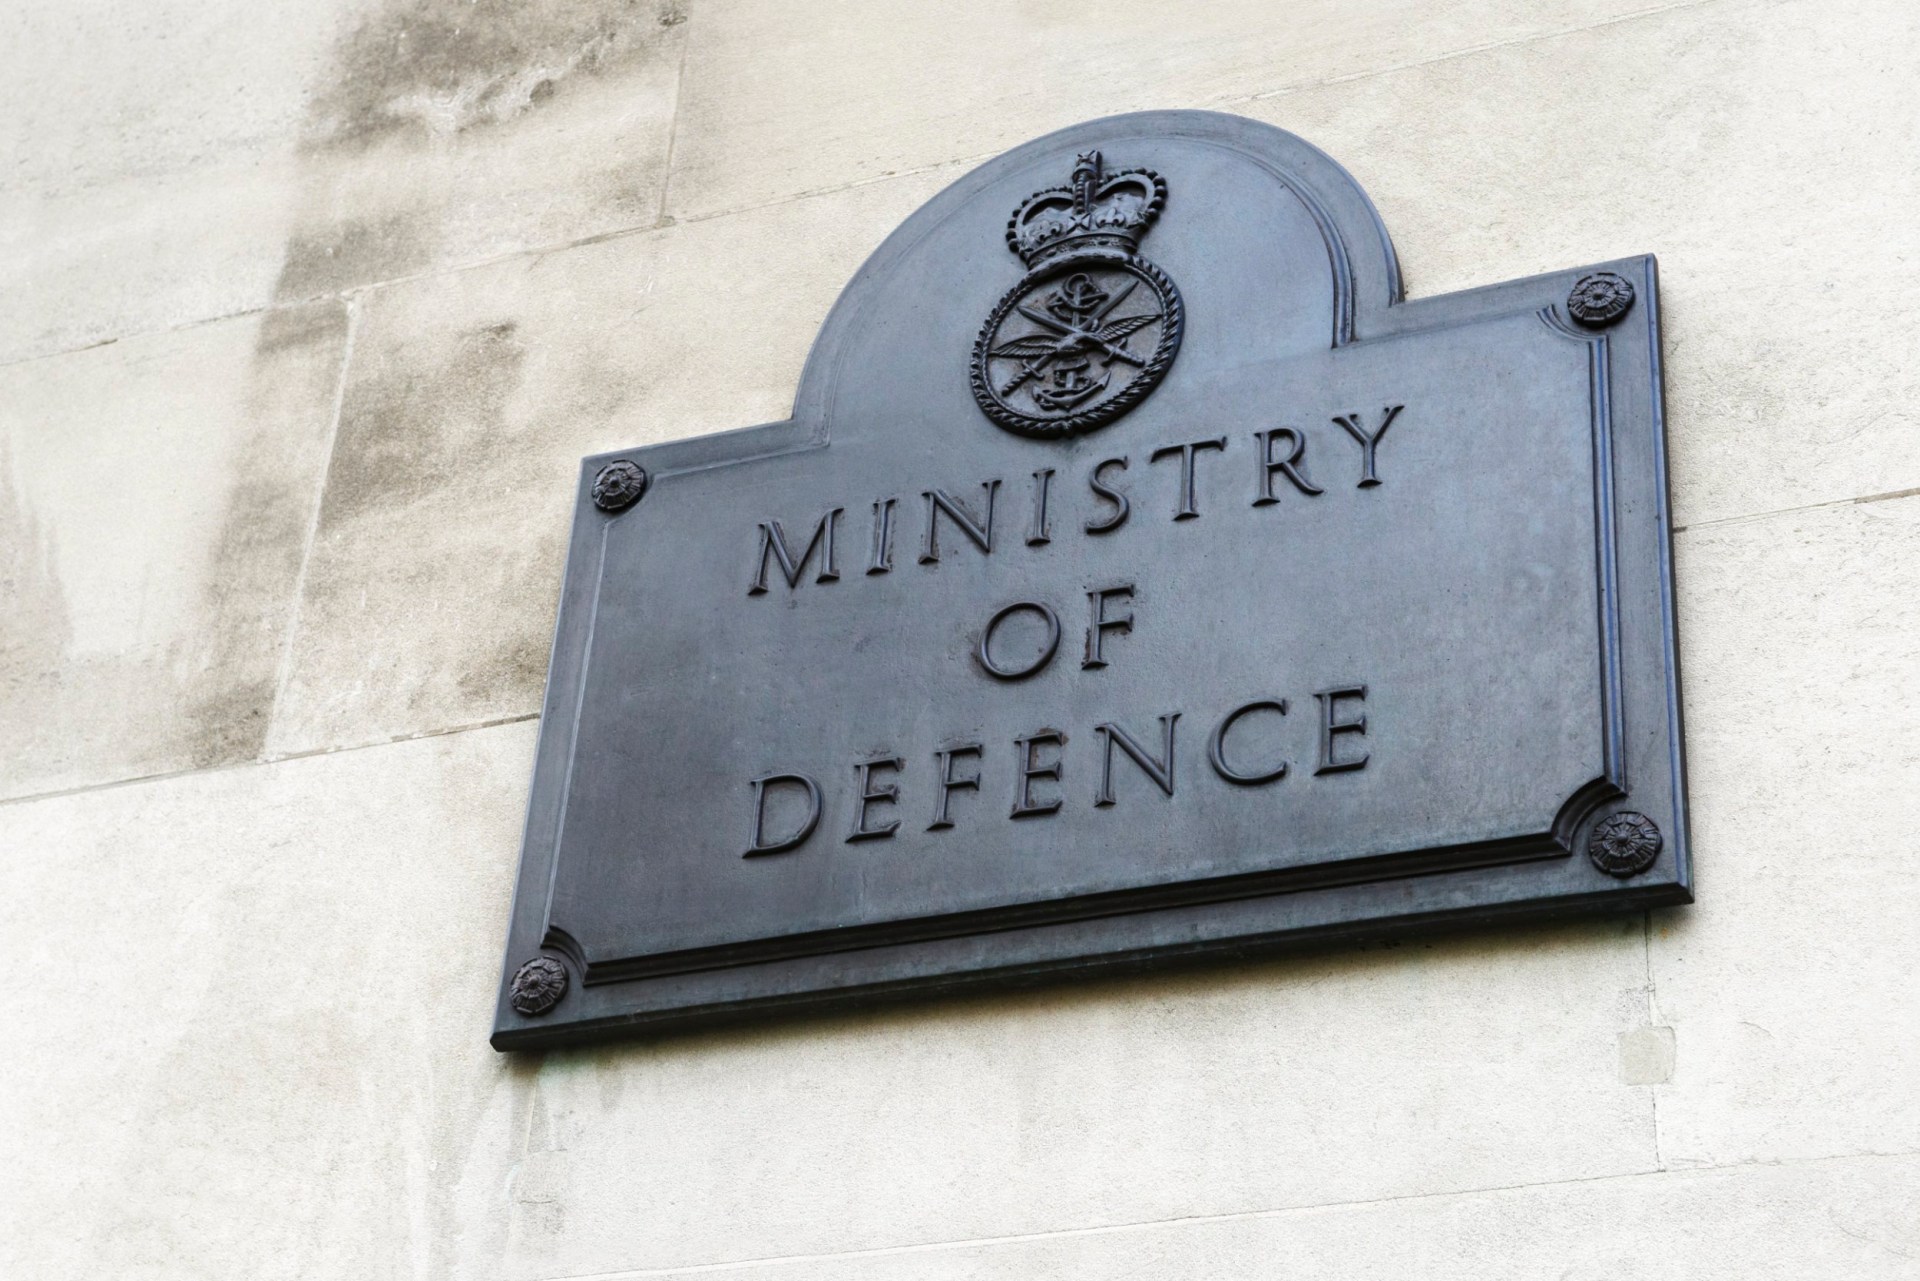 china 'accesses personal data of armed forces in ministry of defence hack'